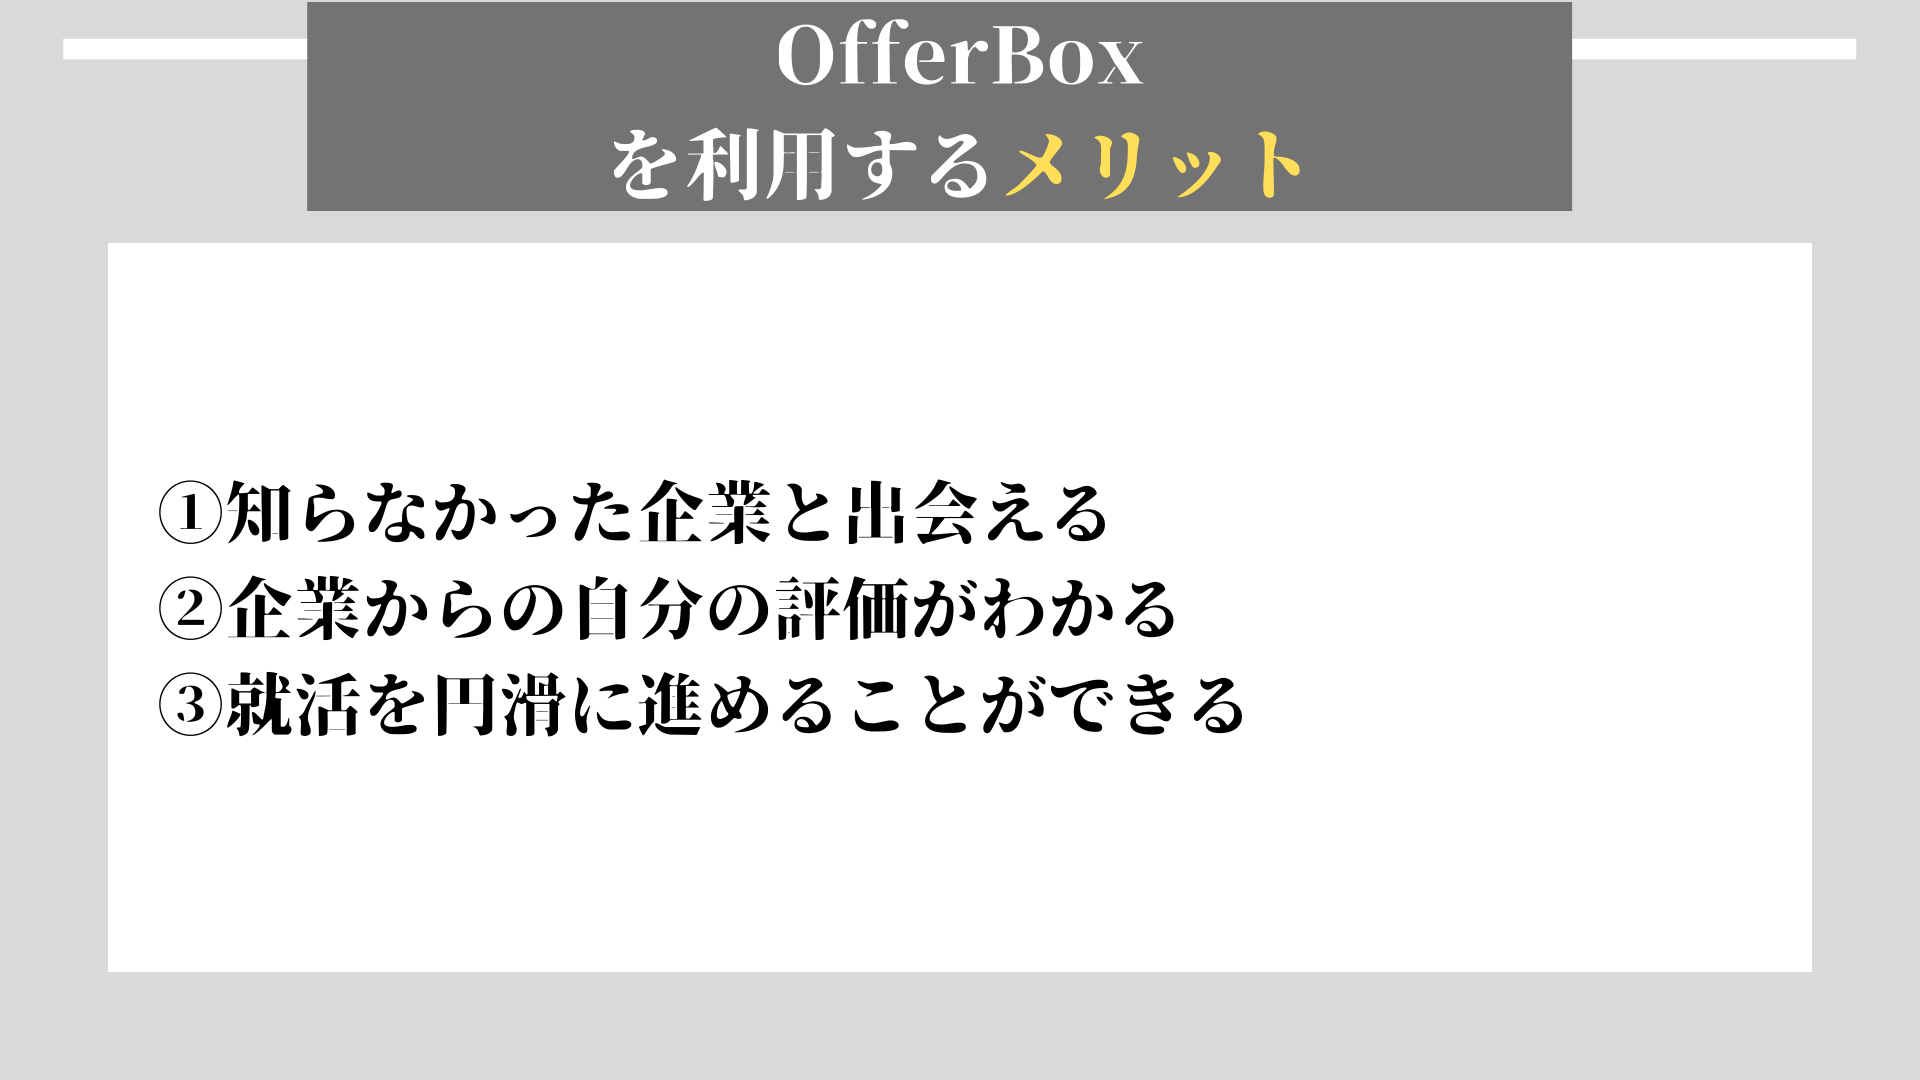 OfferBox　メリット